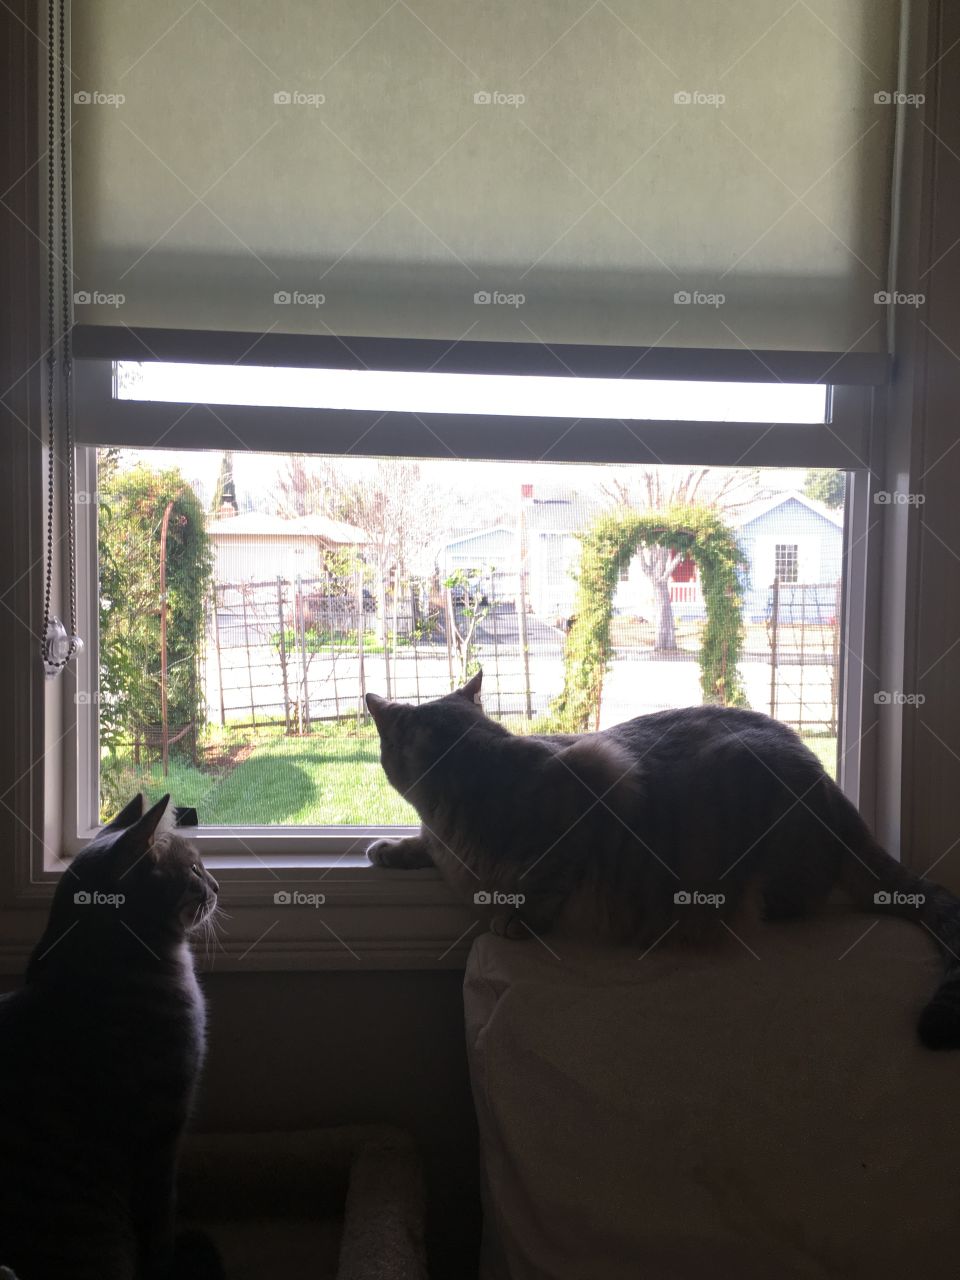 With two cats in the yard, life used to be so hard... 